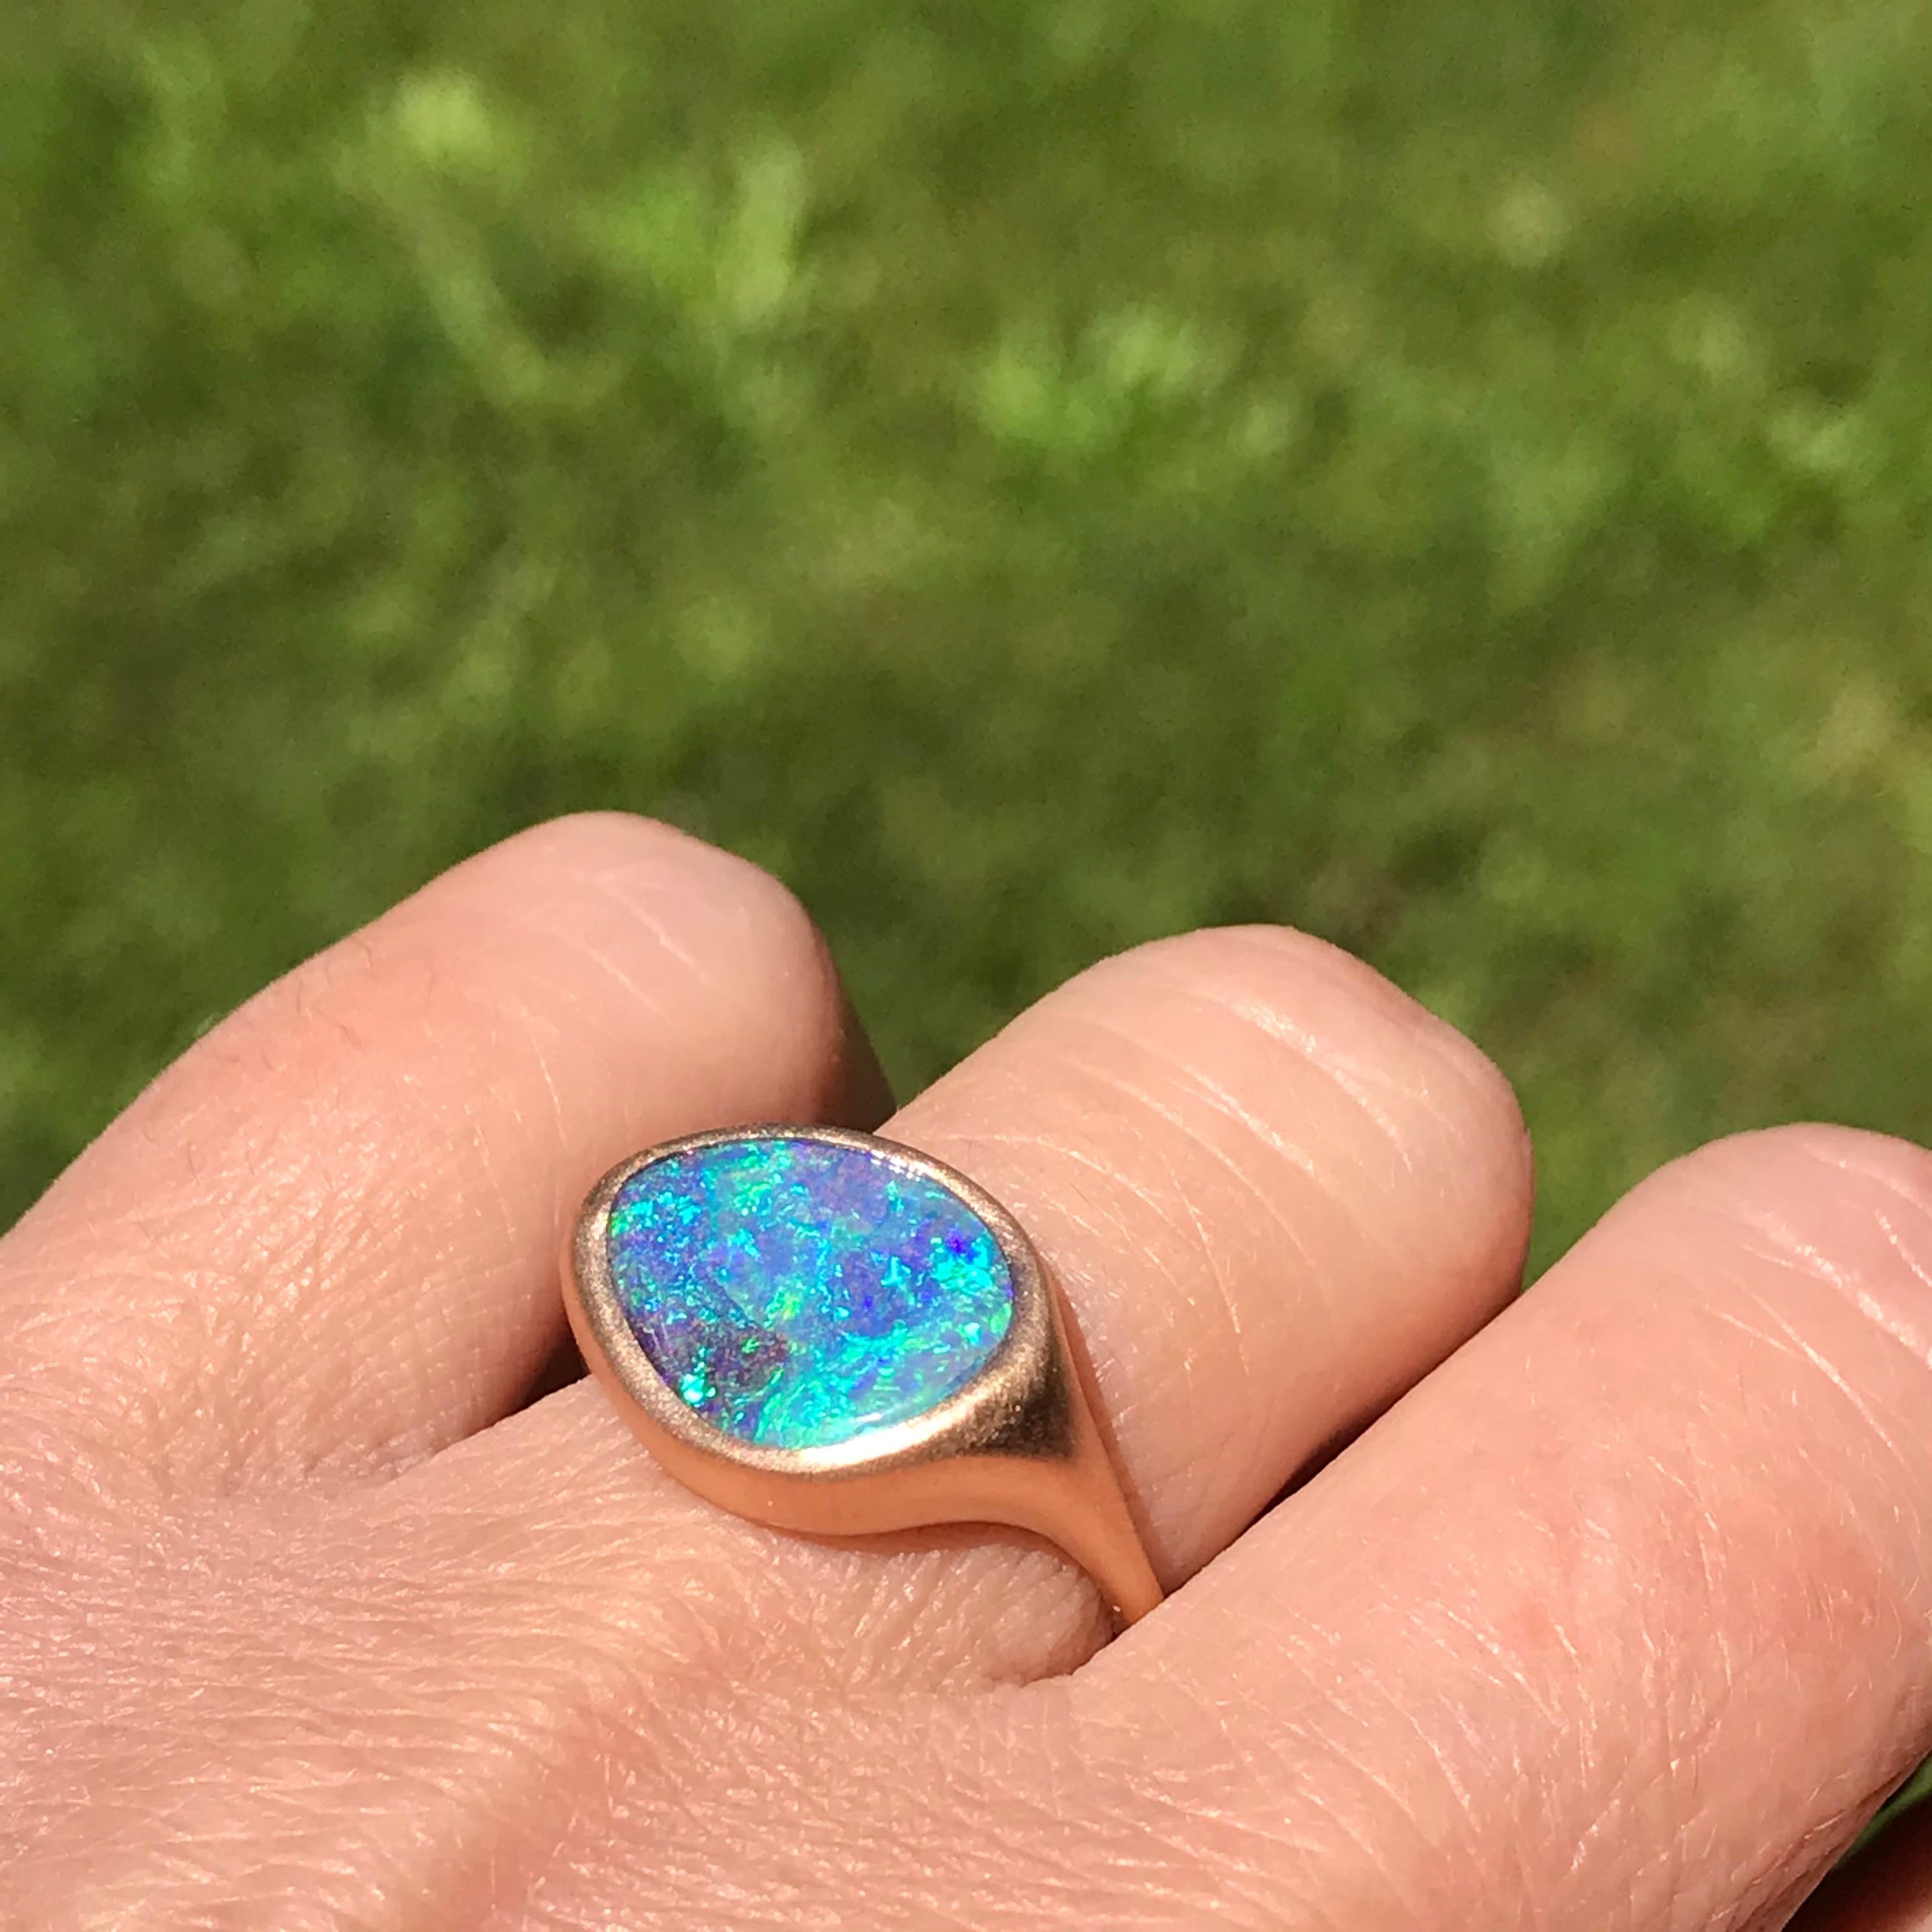 Dalben design One of a kind 18 kt rose gold satin finishing ring with a 3,5 carat bezel-set Australian Boulder Opal .  
The stone has deep blue colors with green light spots .
Ring size 6 US -  52 EU re-sizable to most finger sizes.  
Bezel setting